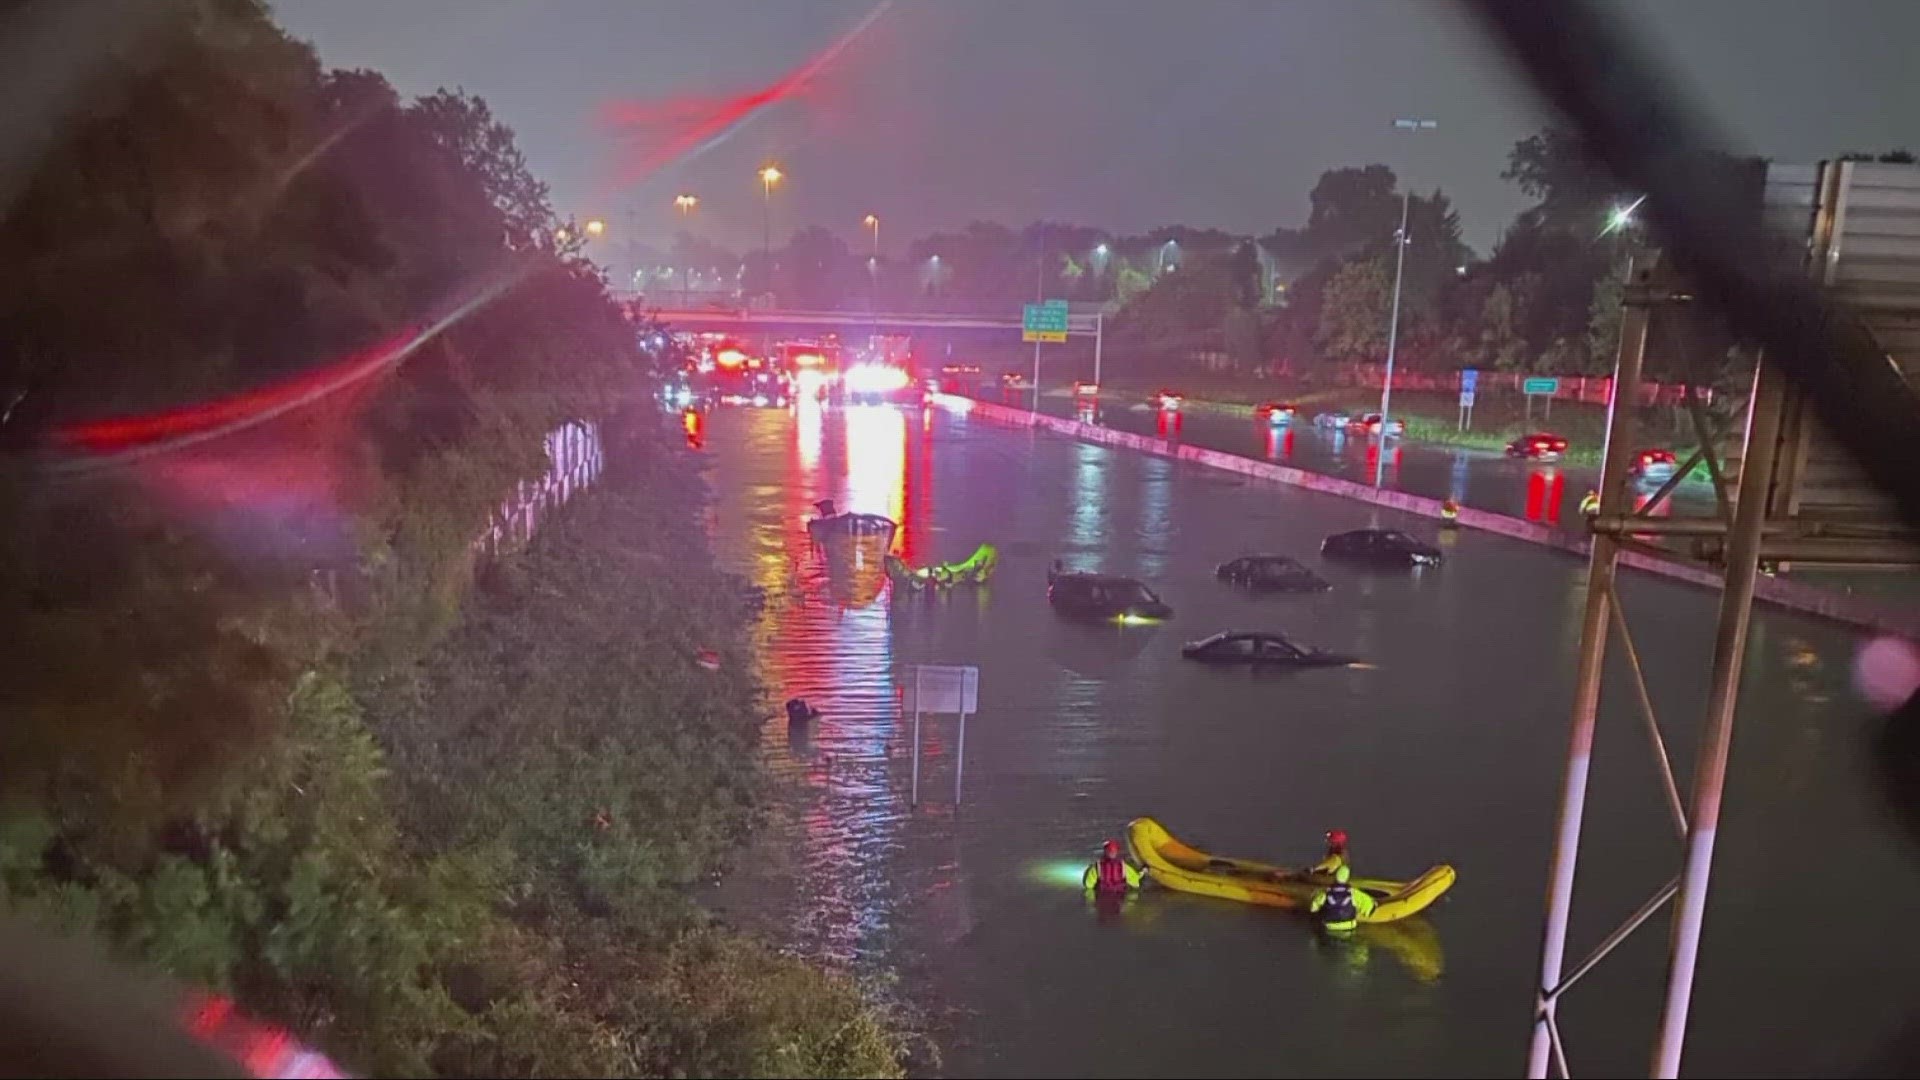 As strong storms swept through Northeast Ohio on Wednesday evening, authorities say 10 people had to be rescued from a flooded portion of I-90 in Lakewood.